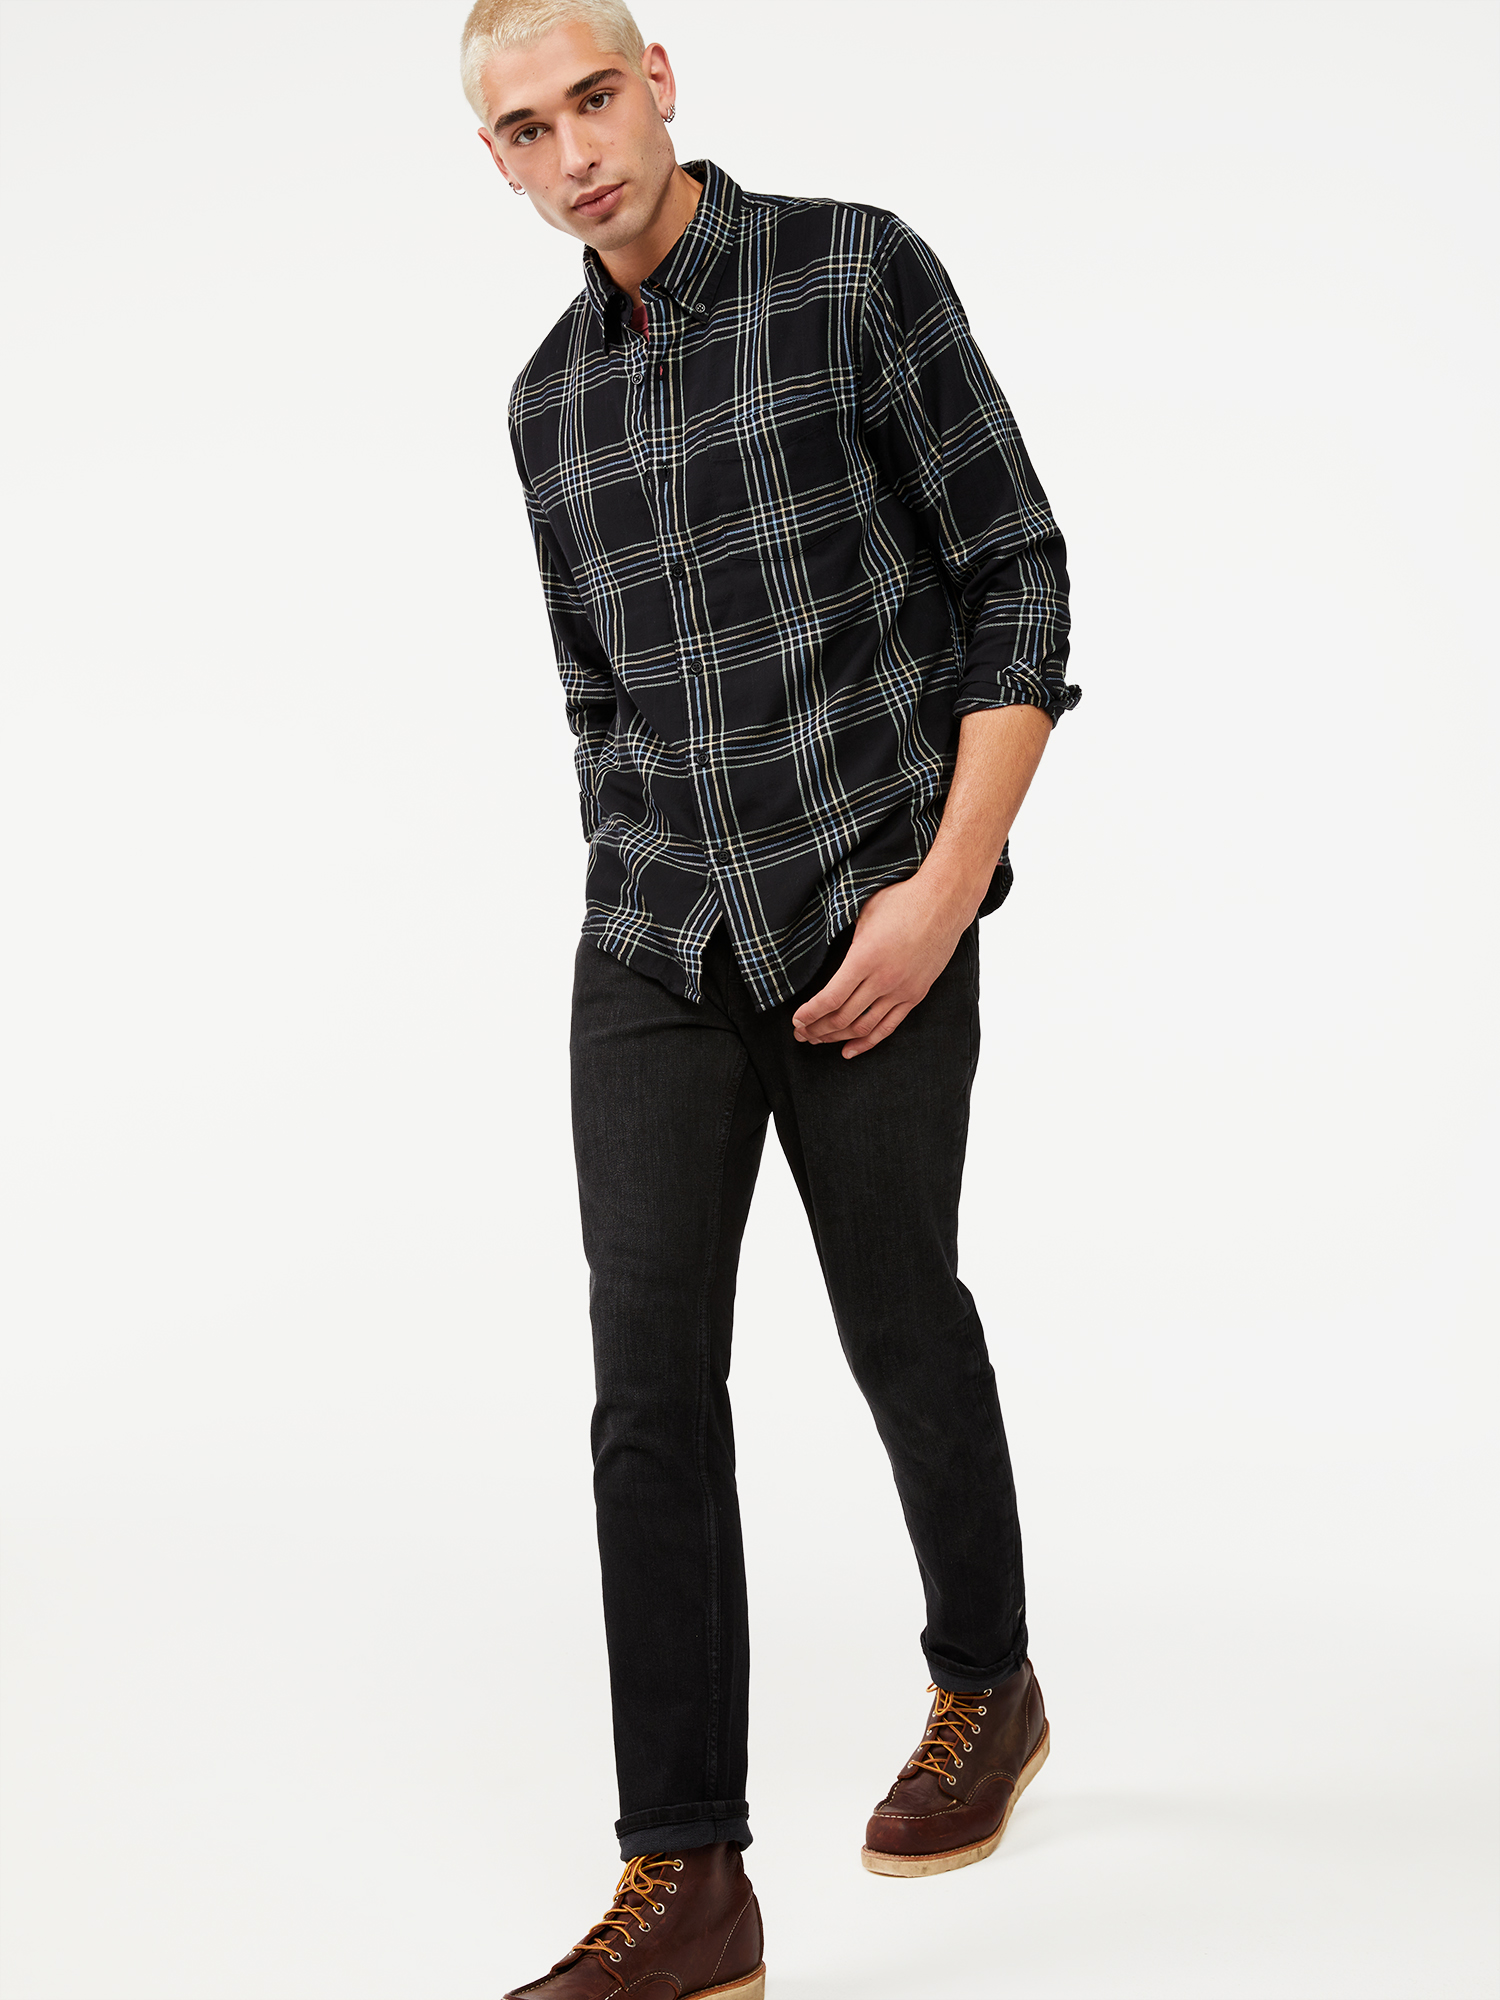 Free Assembly Men's Slim Fit Jeans - image 4 of 5